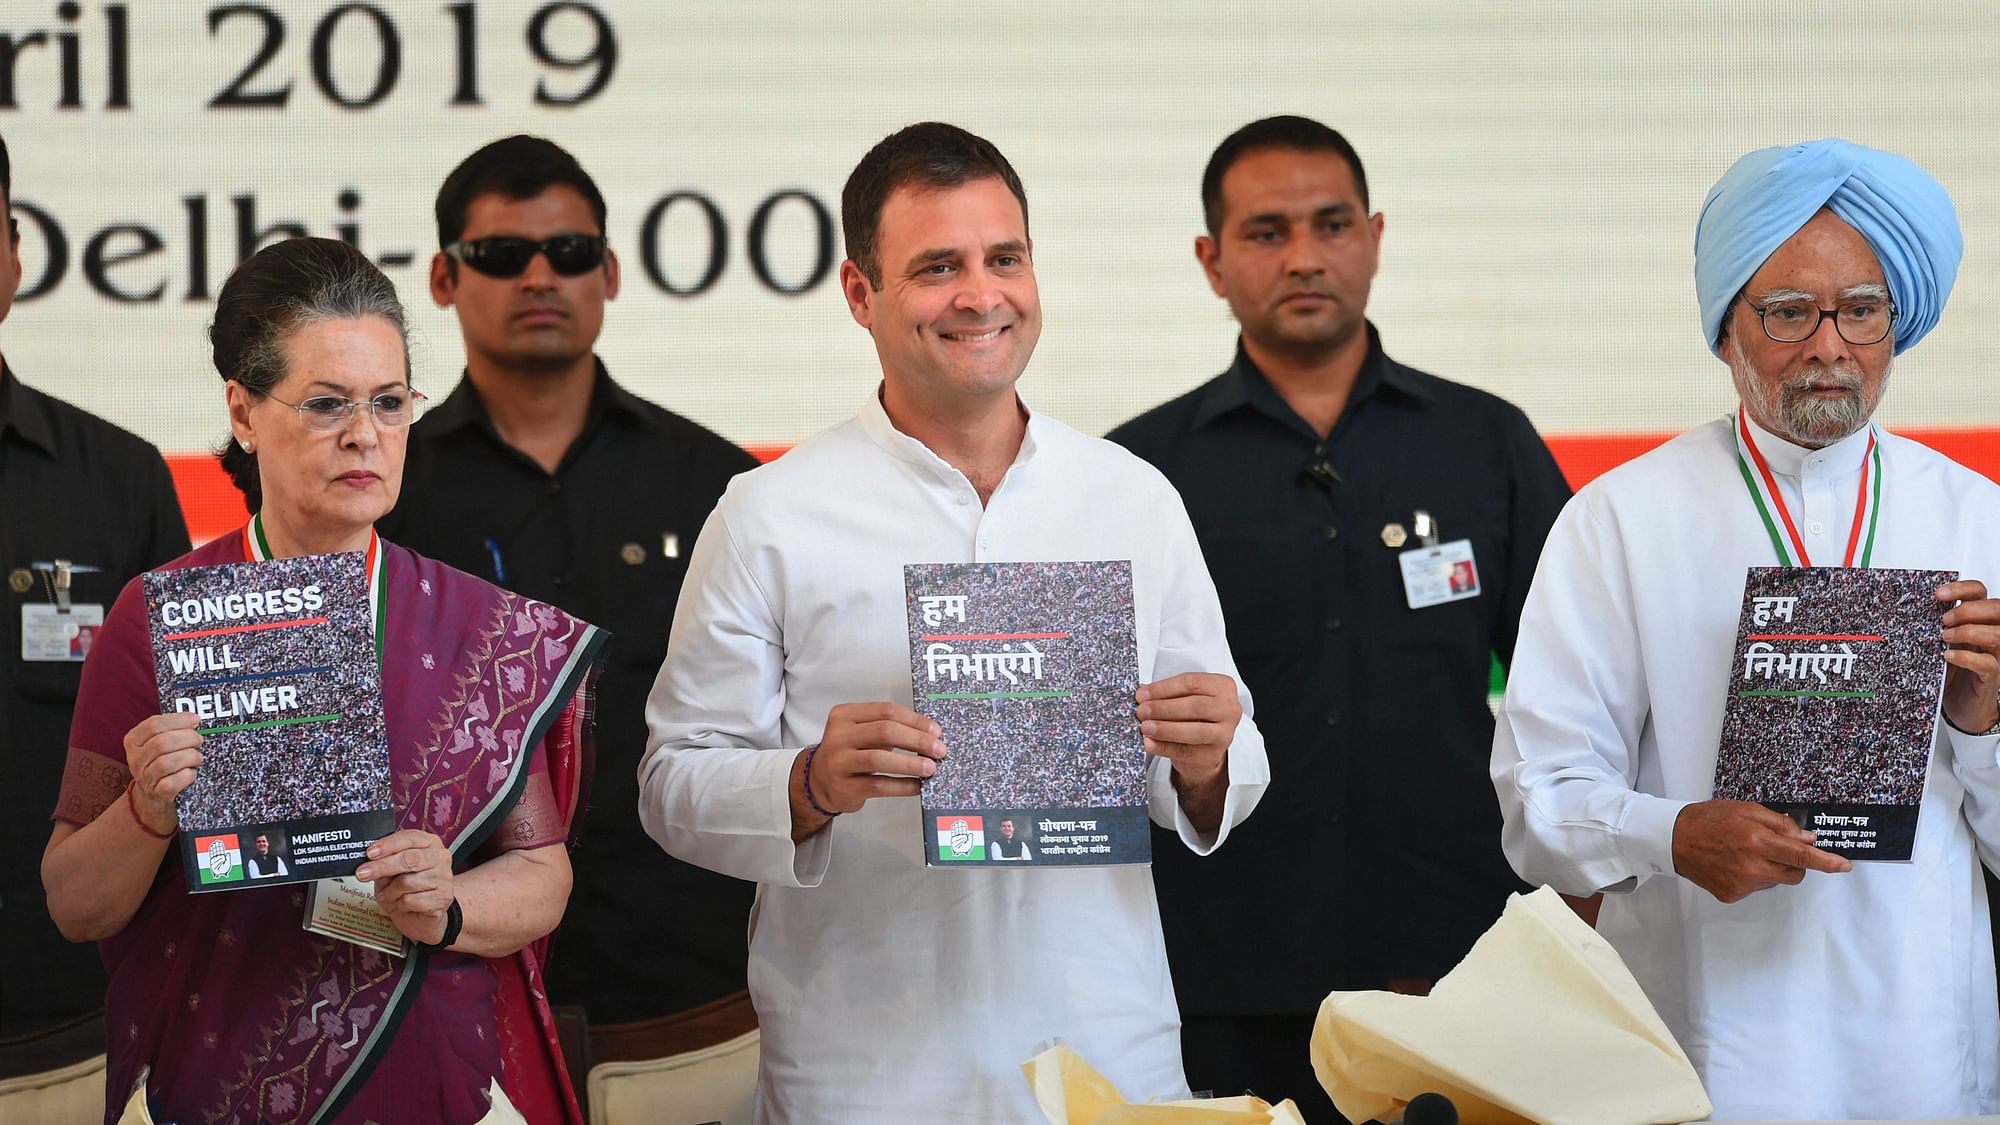 The Congress released its manifesto for the 2019 Lok Sabha polls on Tuesday, 2 April.